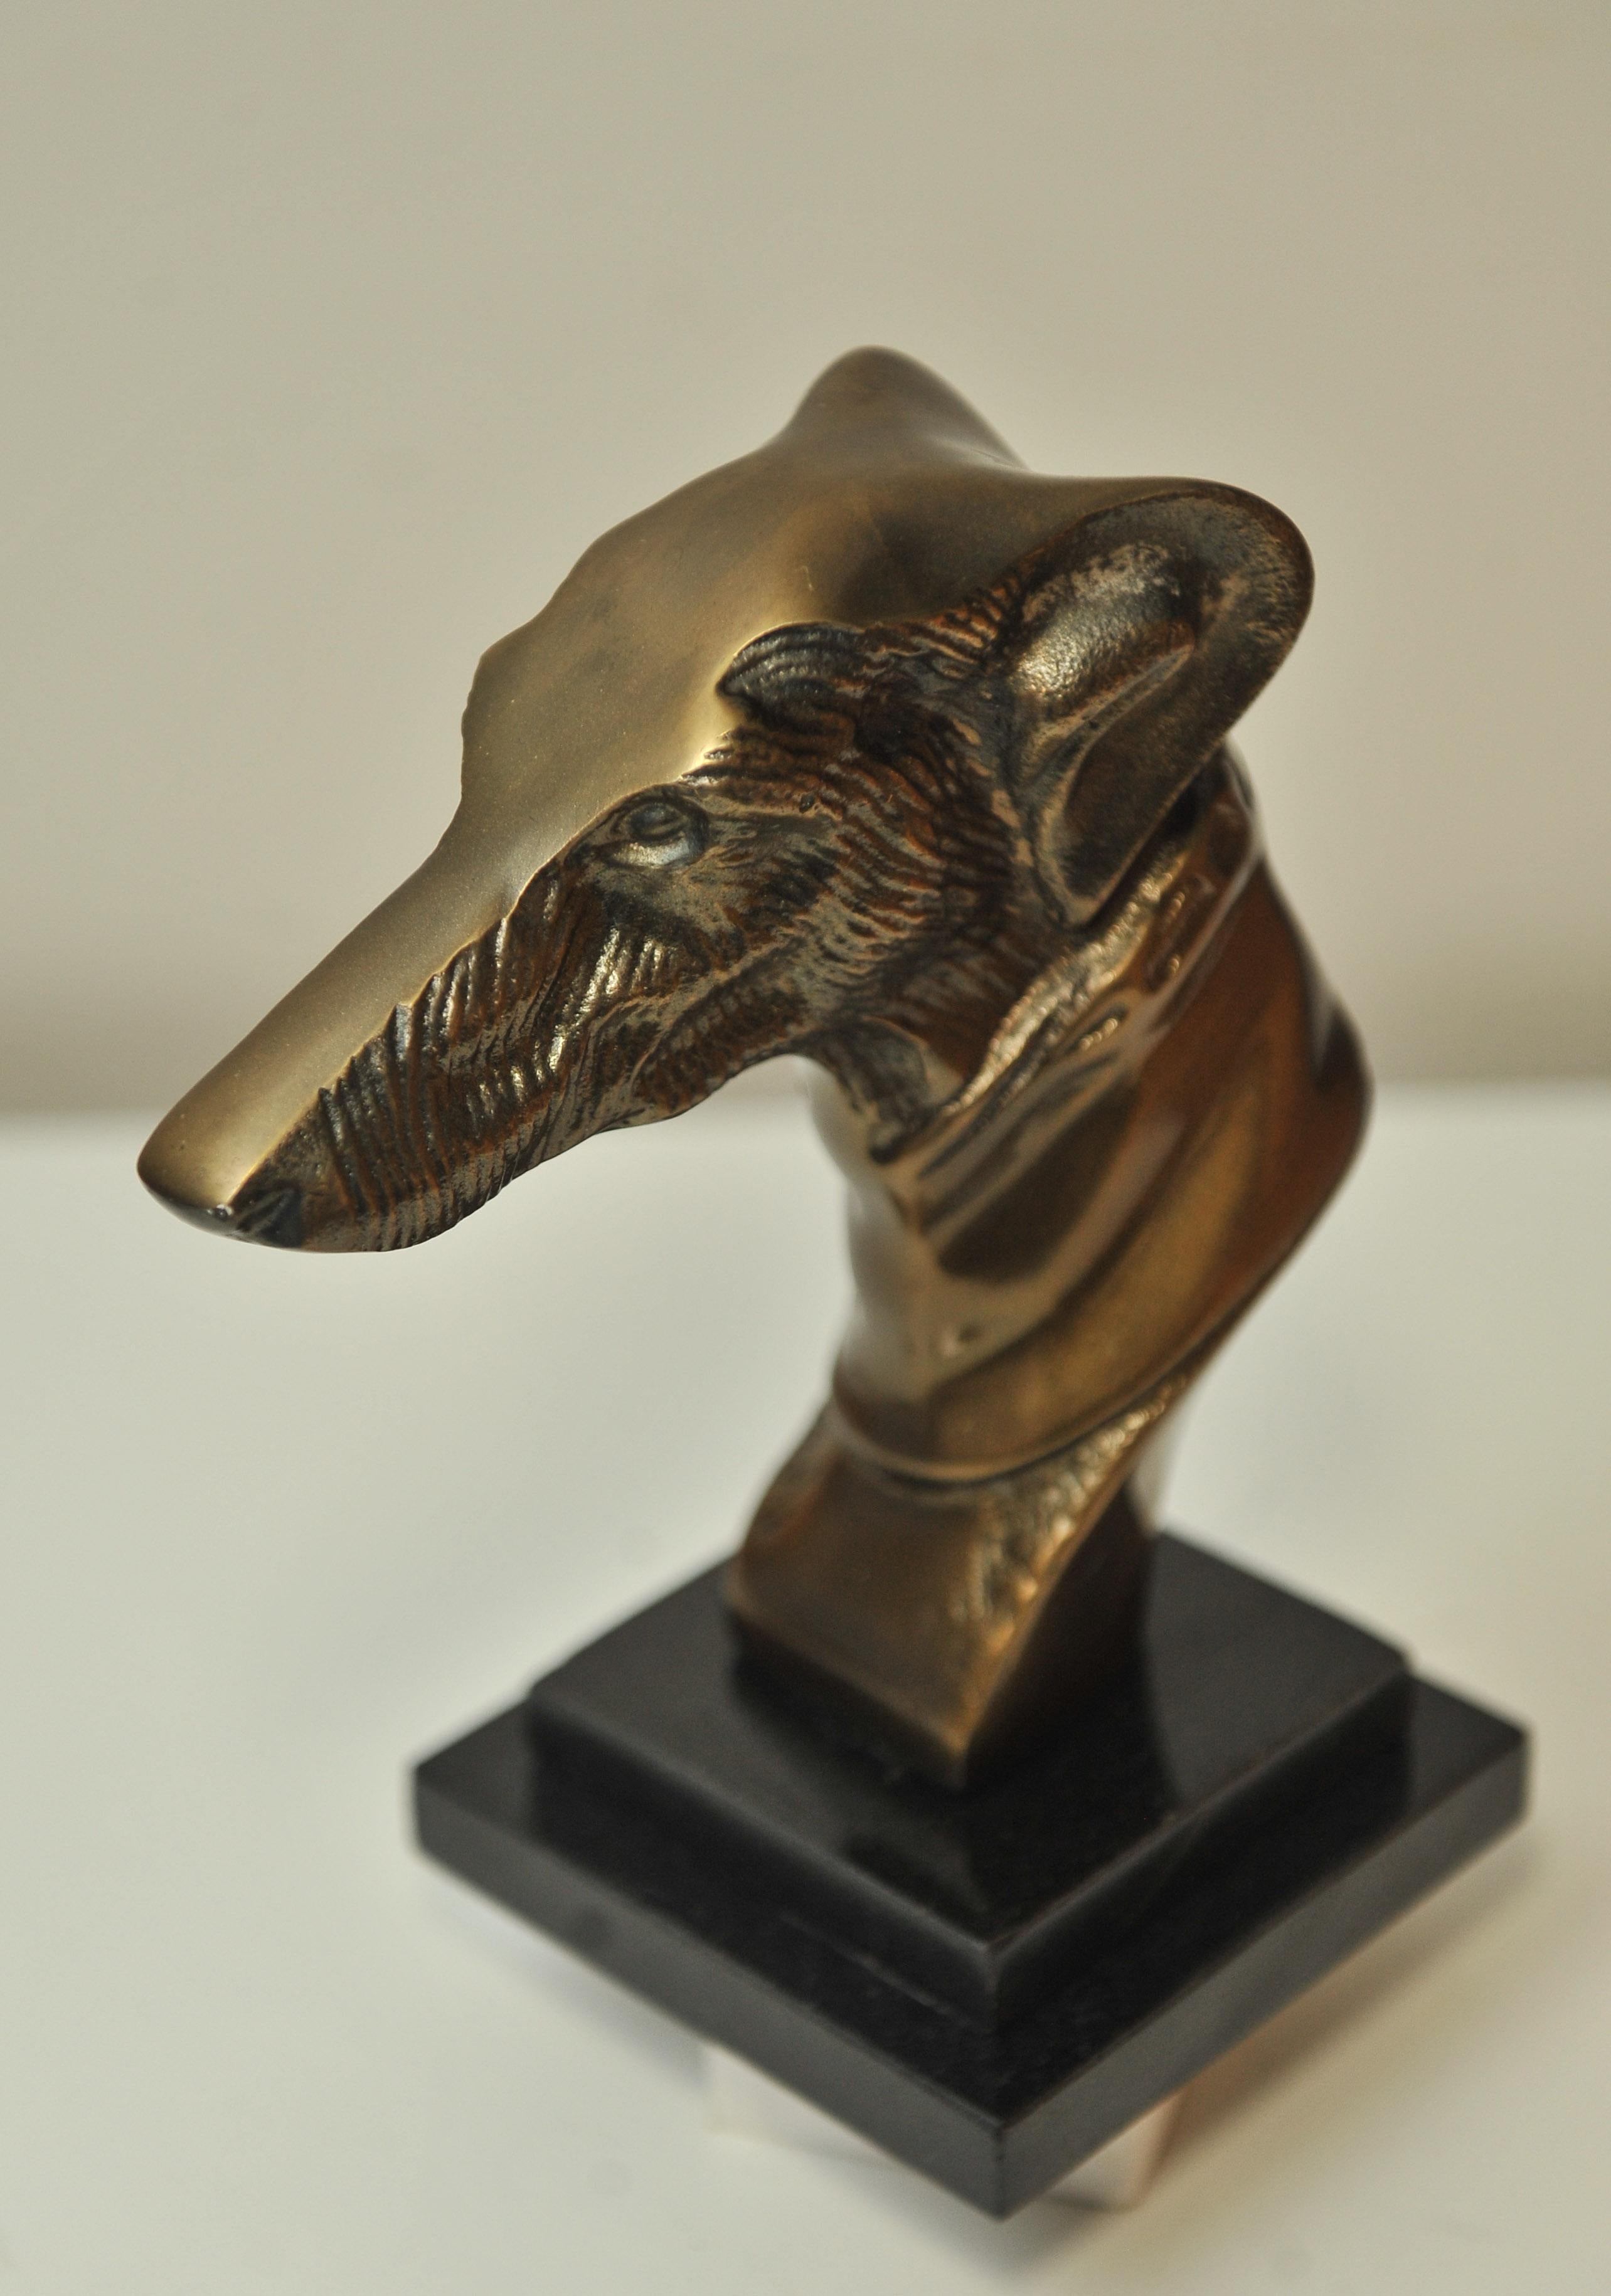 20th Century Greyhound Bronze Figurehead On Plinth Ideal For Desk Paperweight Or Decoration. For Sale